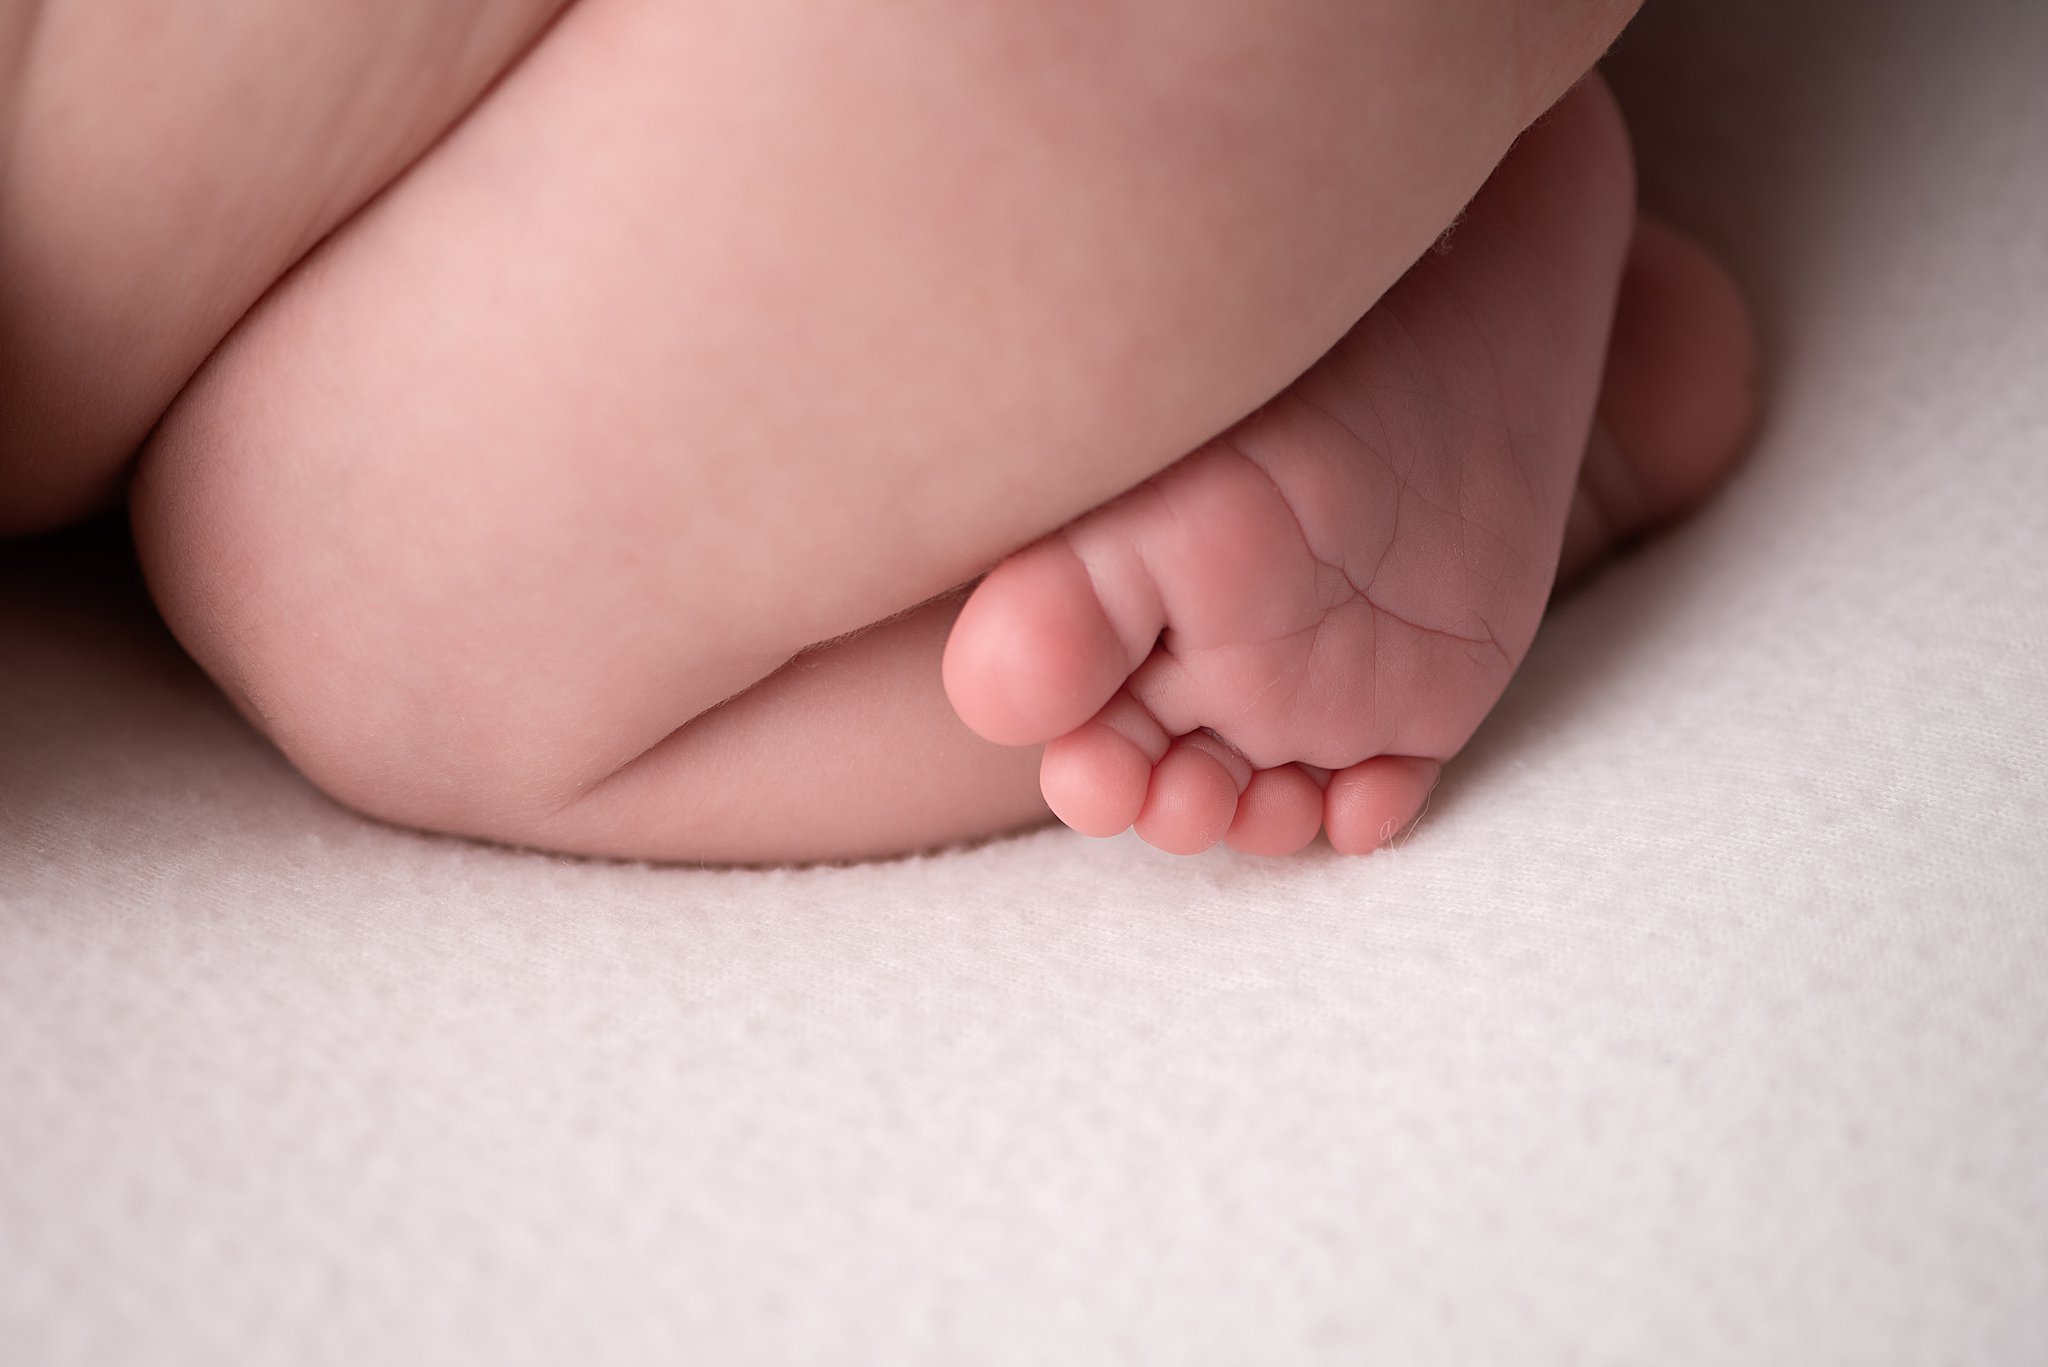 Details of a newborn baby's toes and foot